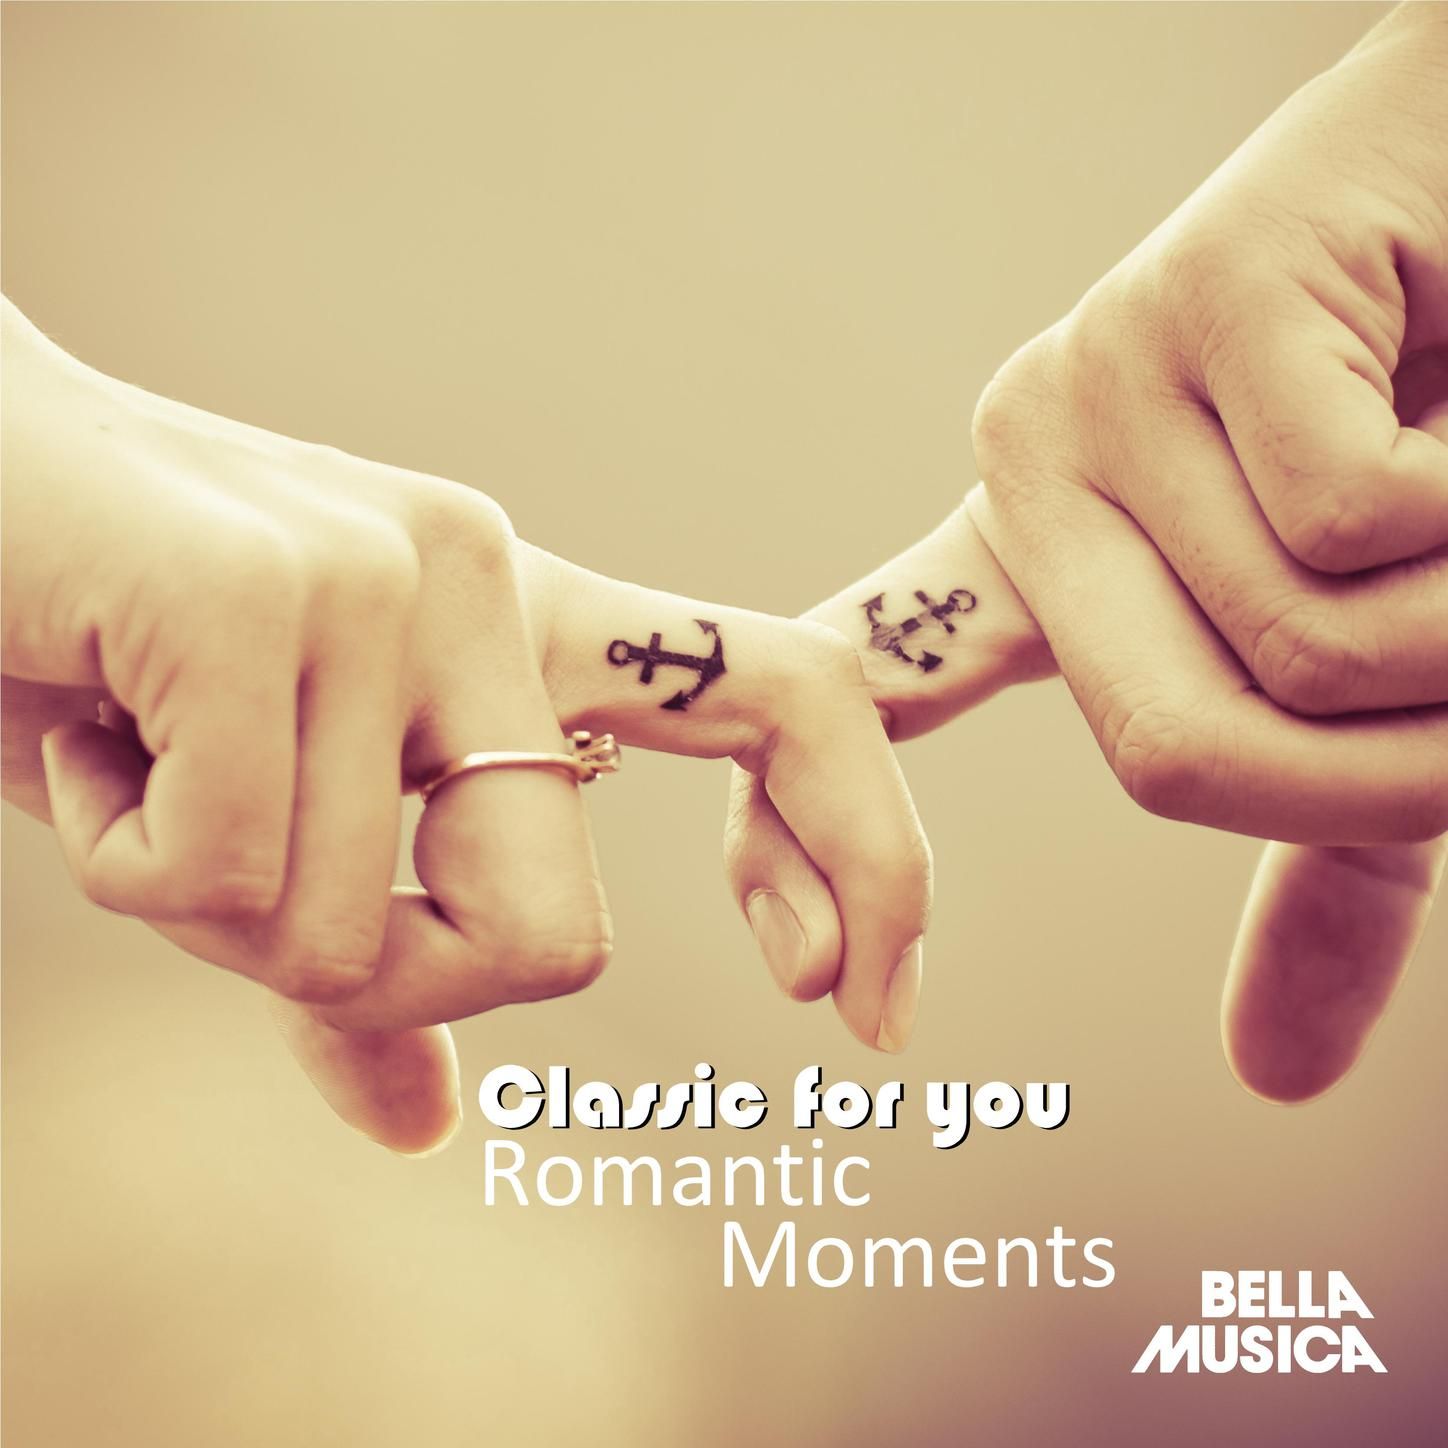 Classic for You: Romantic Moments